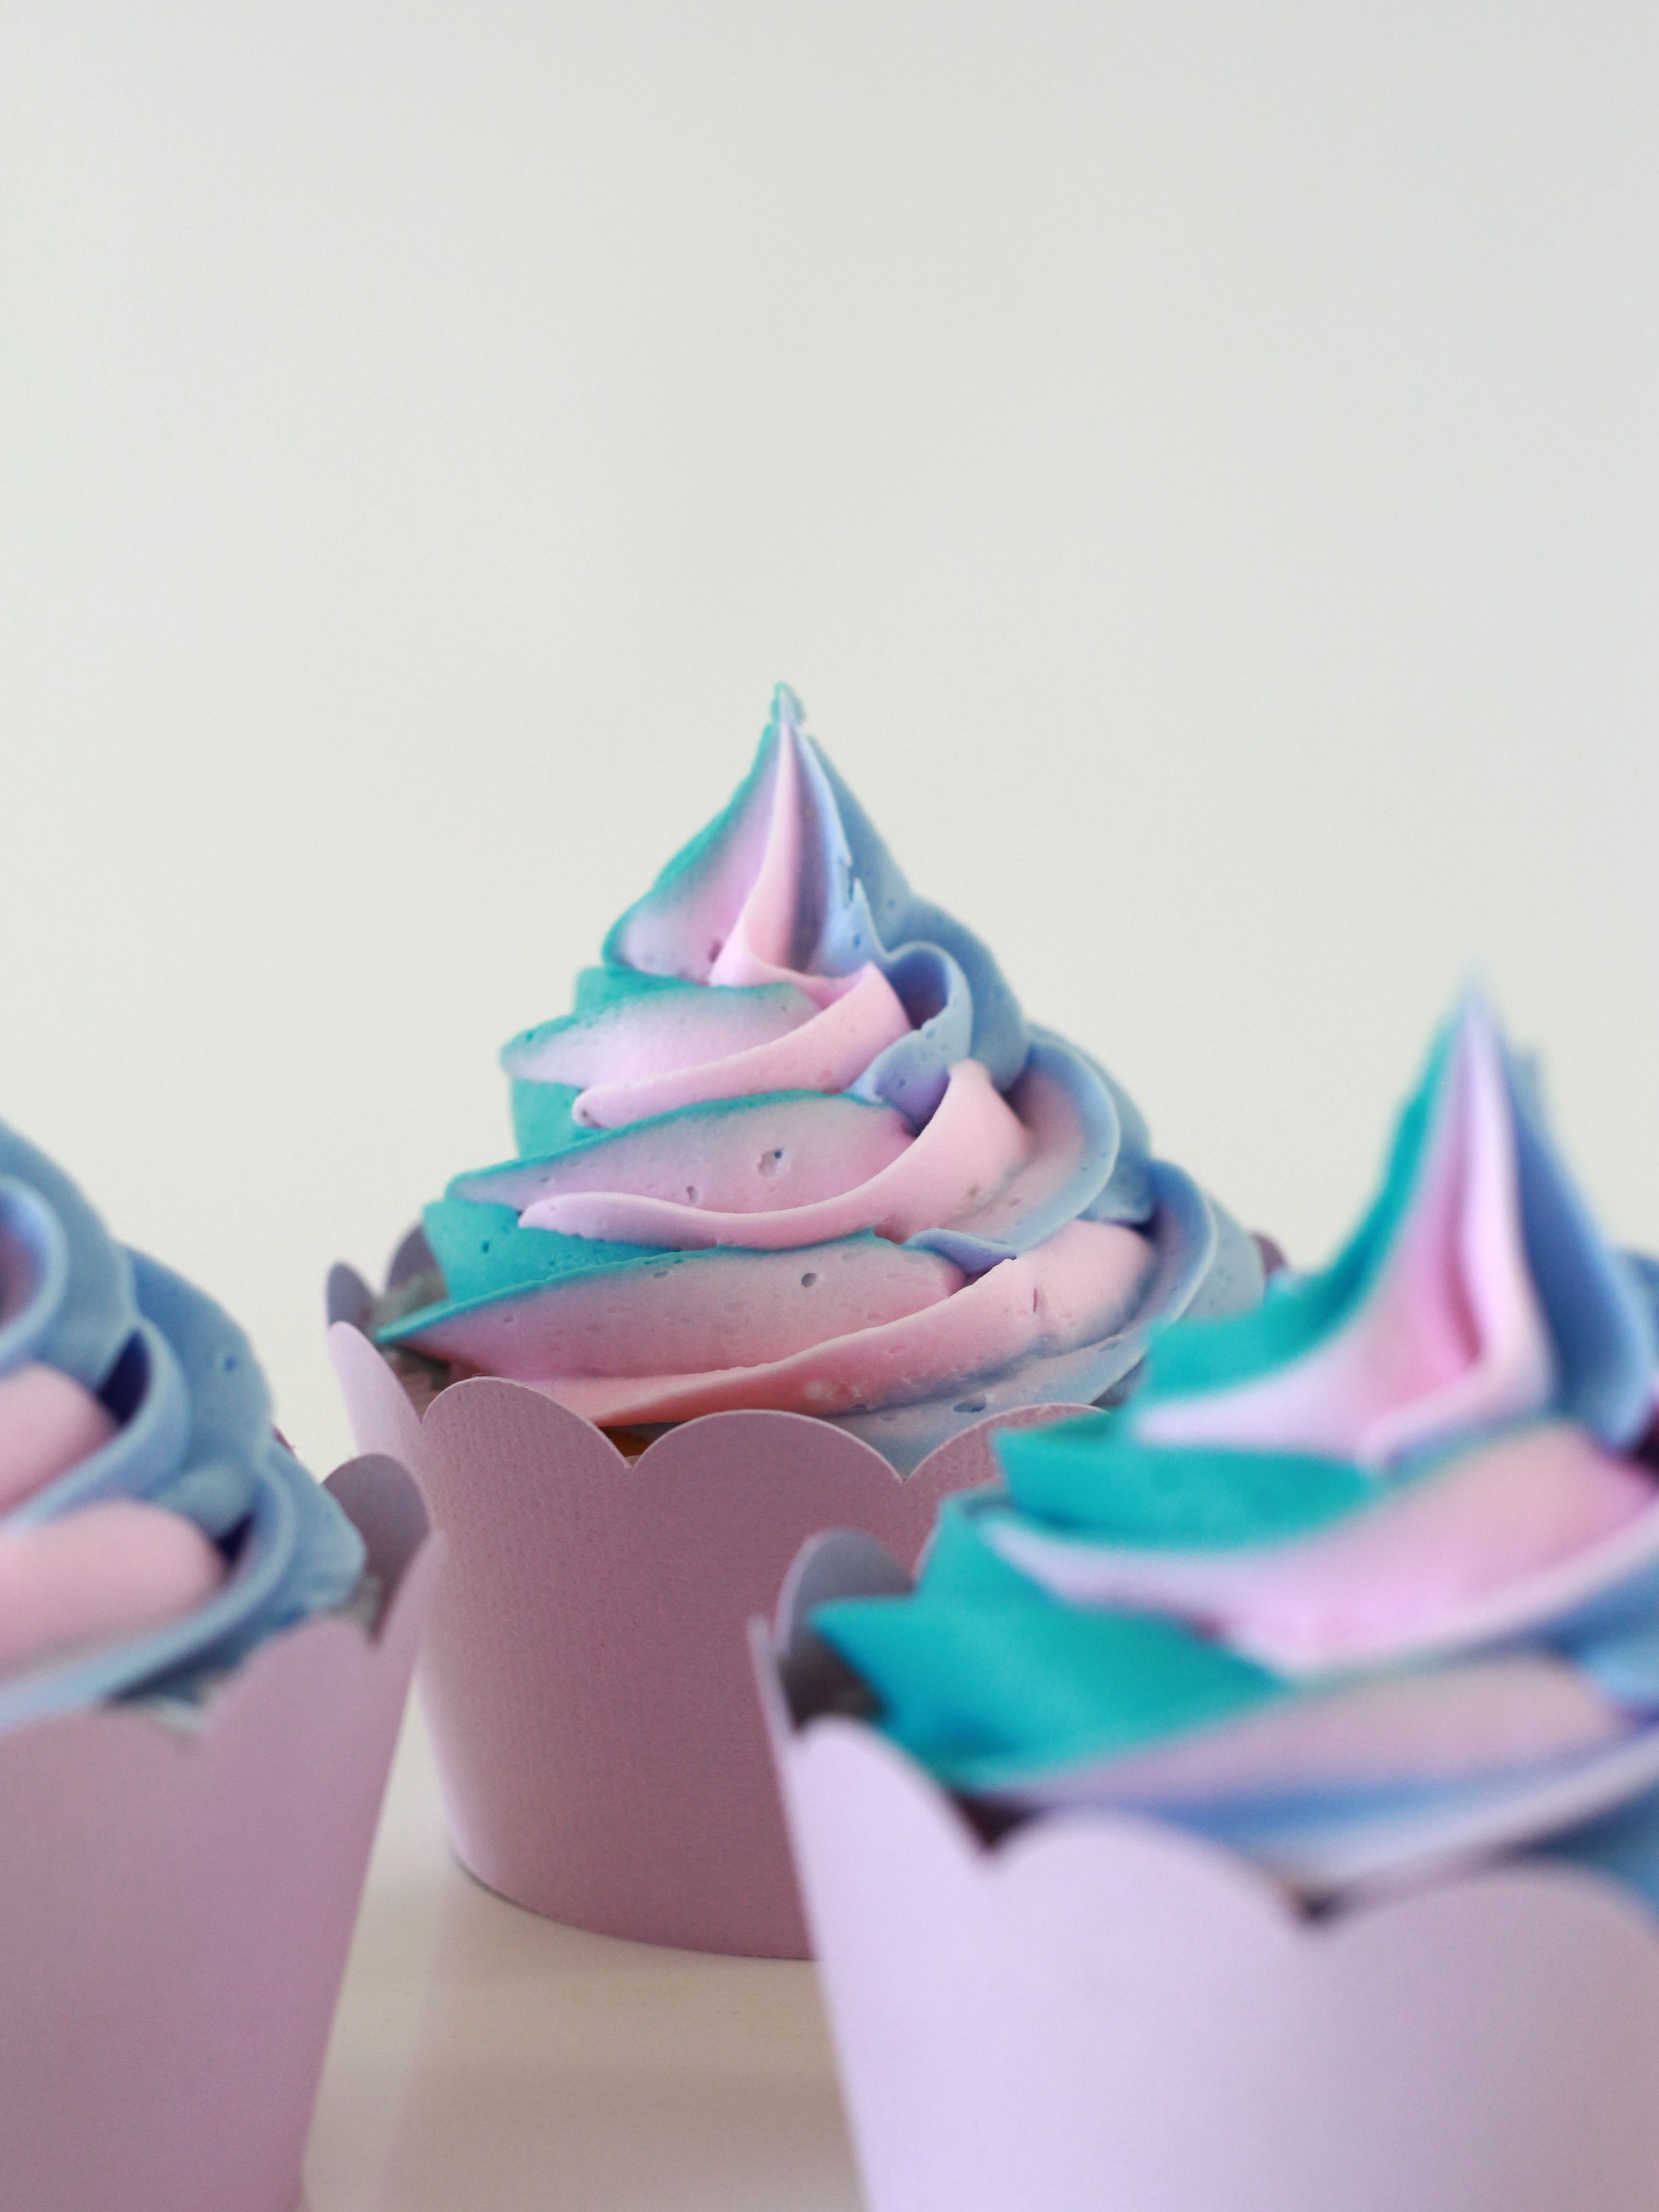 Click here to see how easy it is to make swirl cupcakes. NO fancy equipment required! The color options are limitless and can be customized for any occasion.